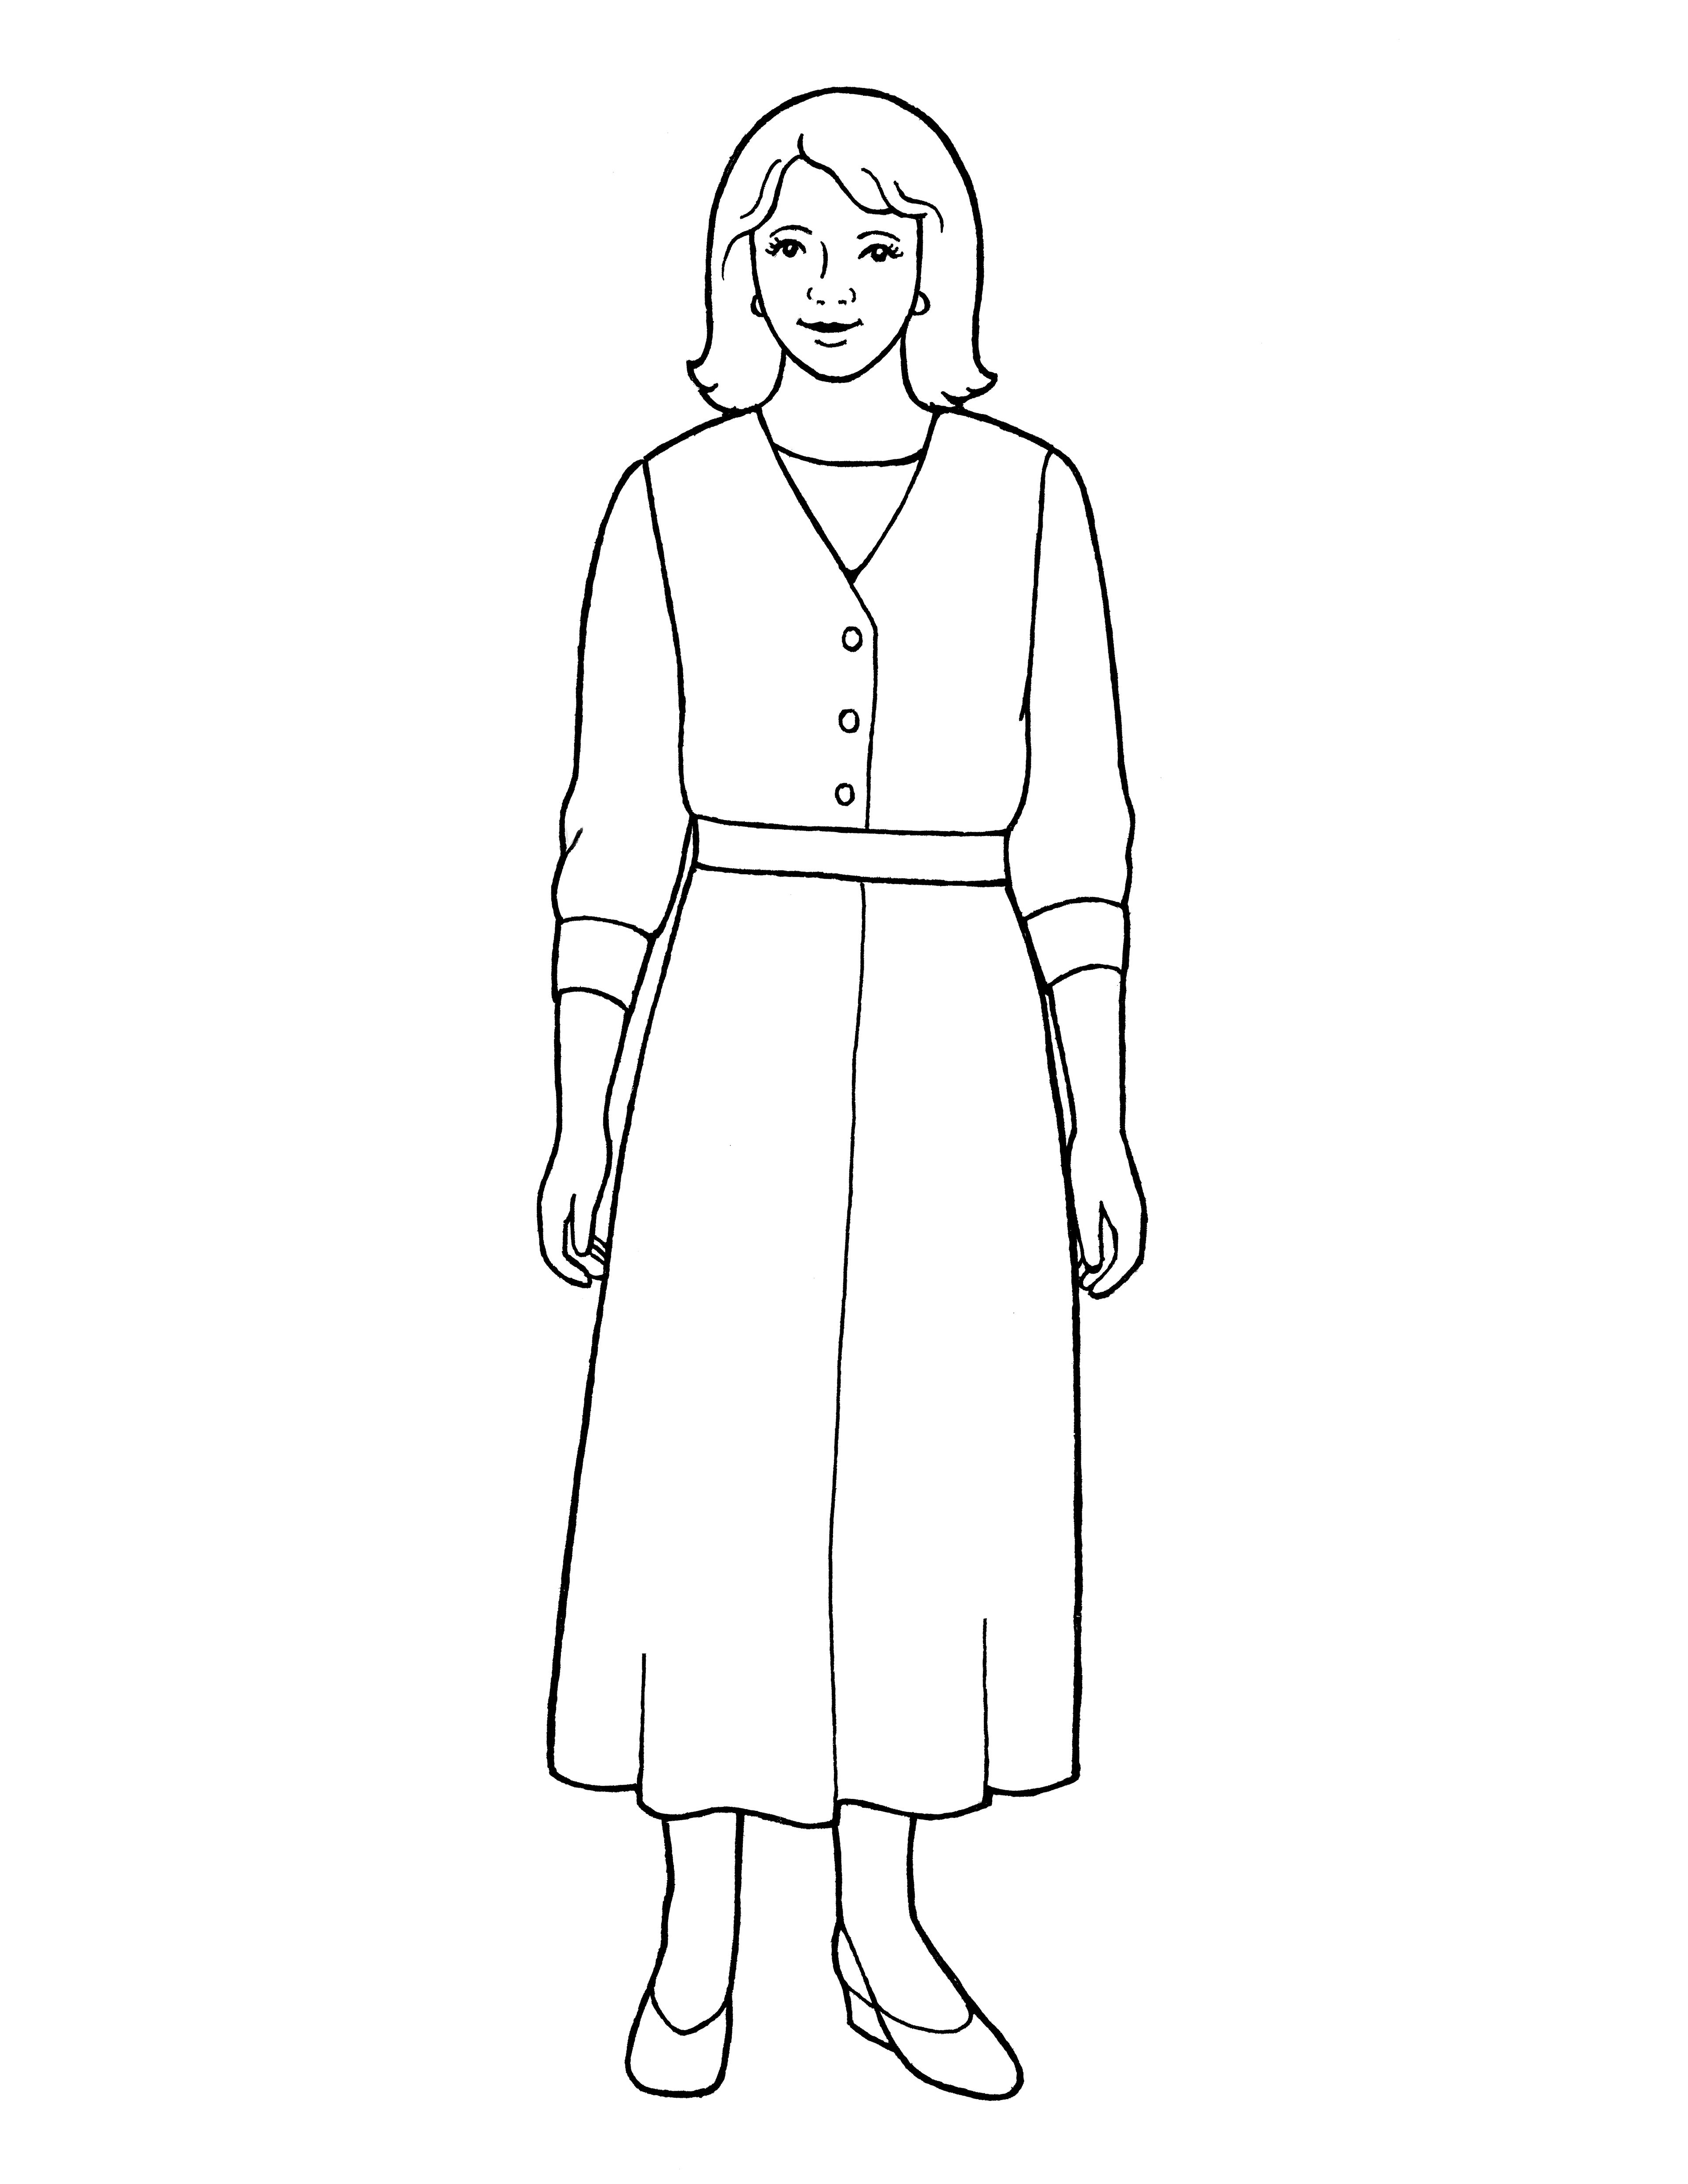 An illustration of a mother from the nursery manual Behold Your Little Ones (2008), page 51.